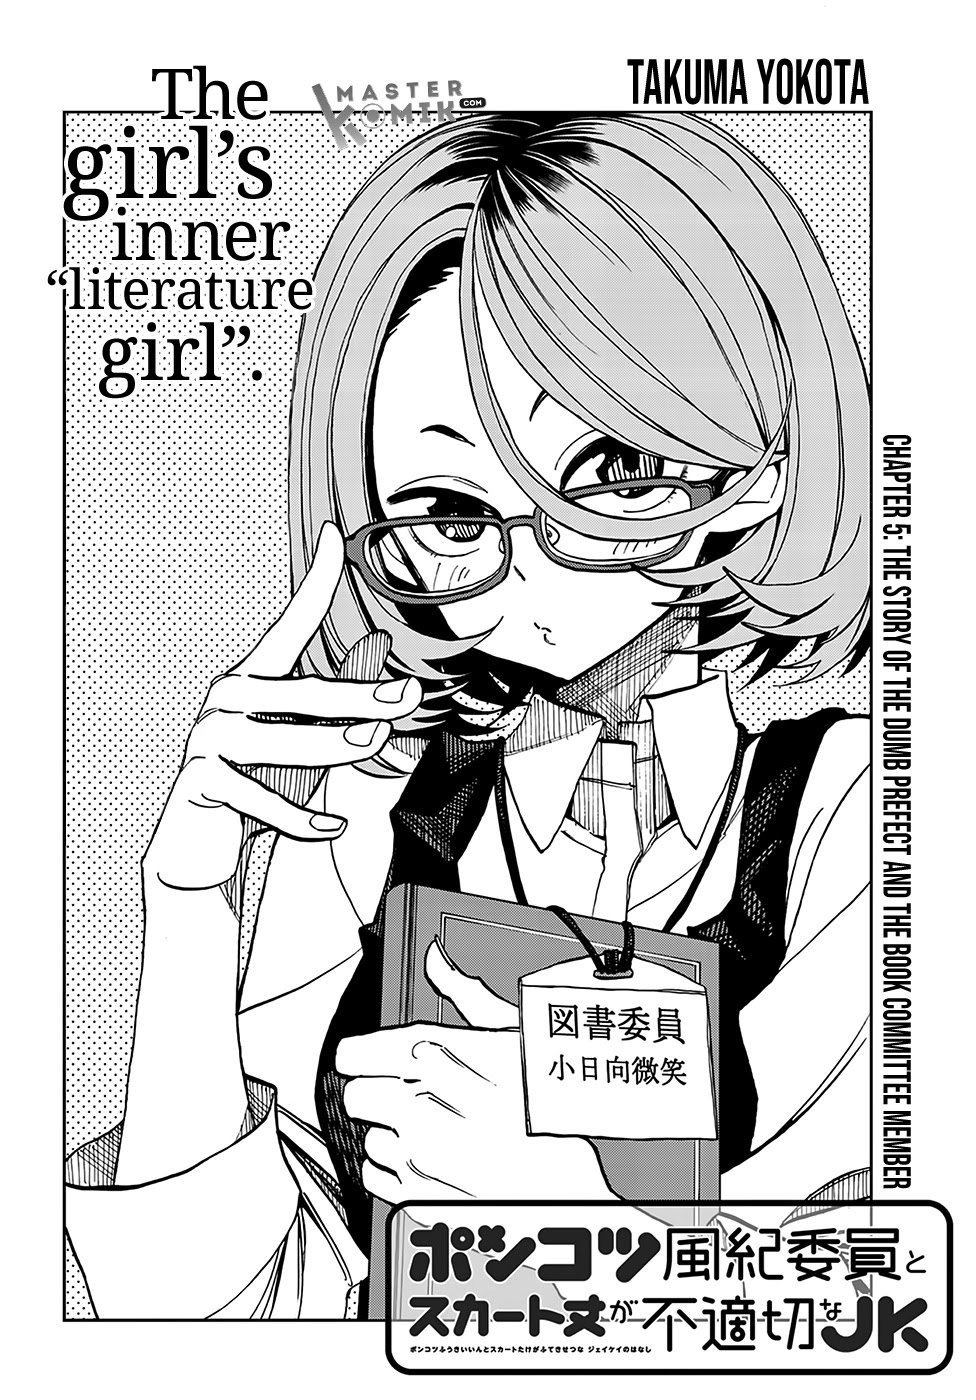 The Story Between A Dumb Prefect And A High School Girl With An Inappropriate Skirt Length Chapter 5